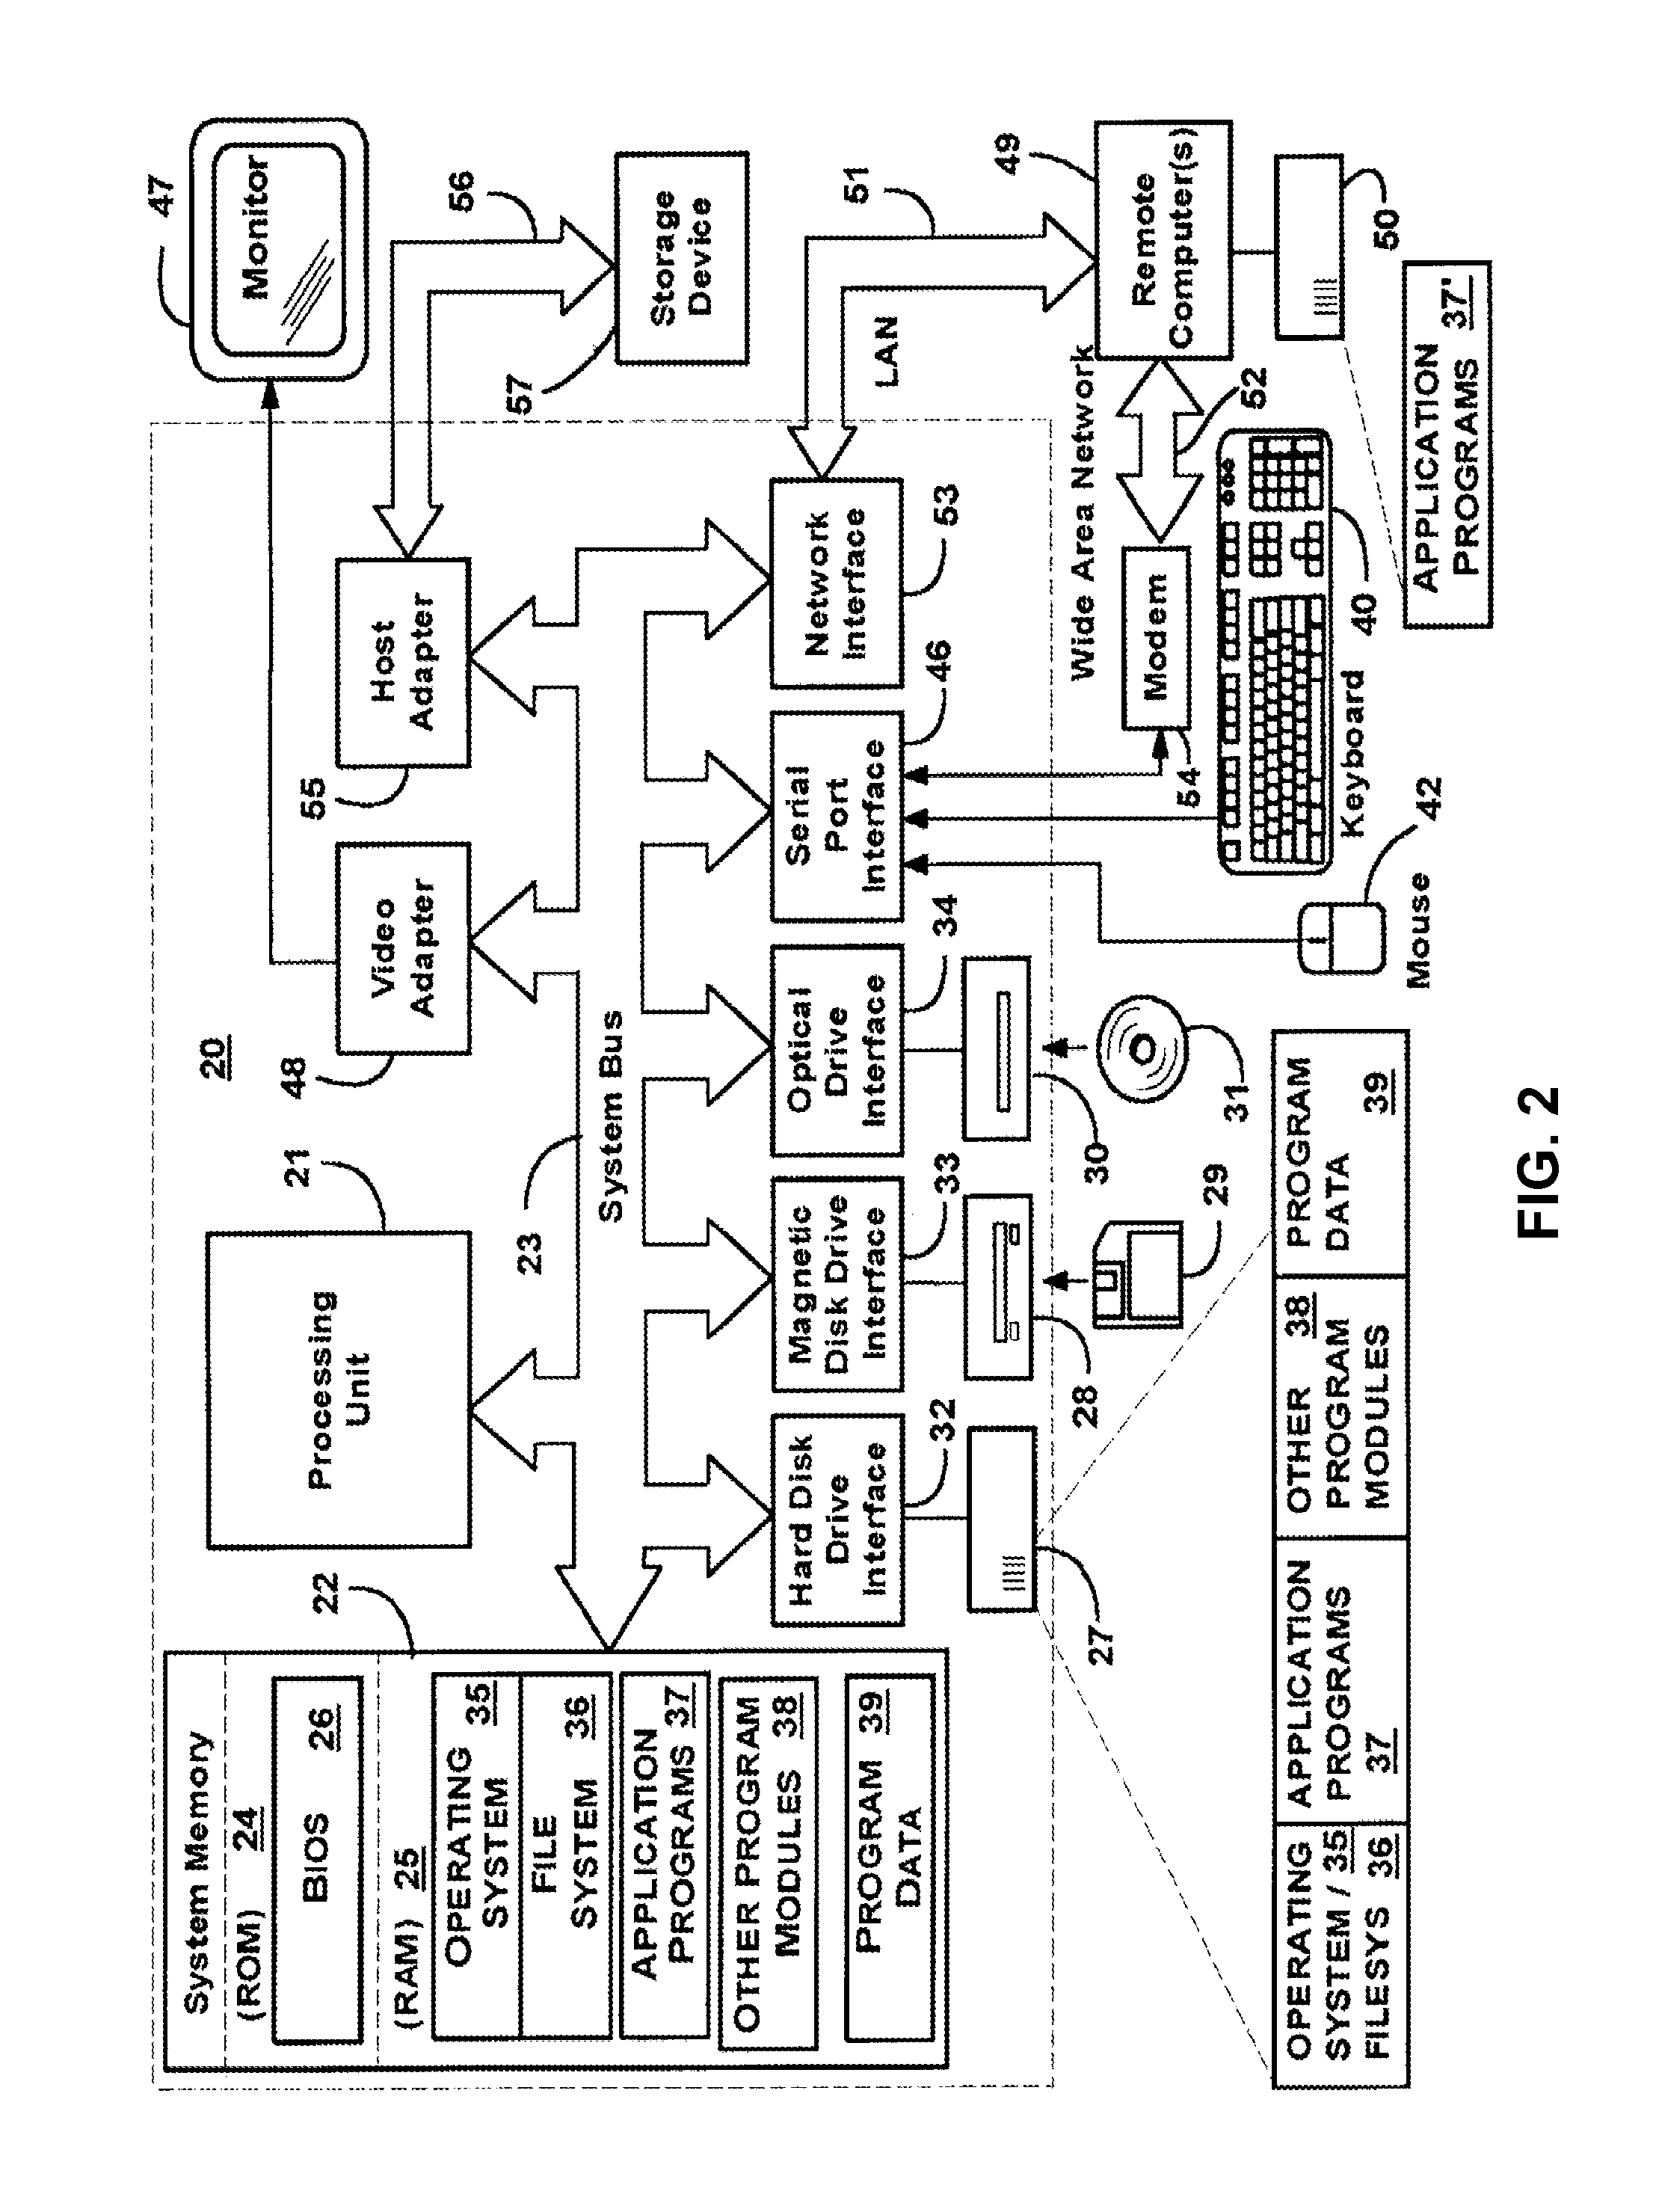 Method and system for anti-malware scanning with variable scan settings